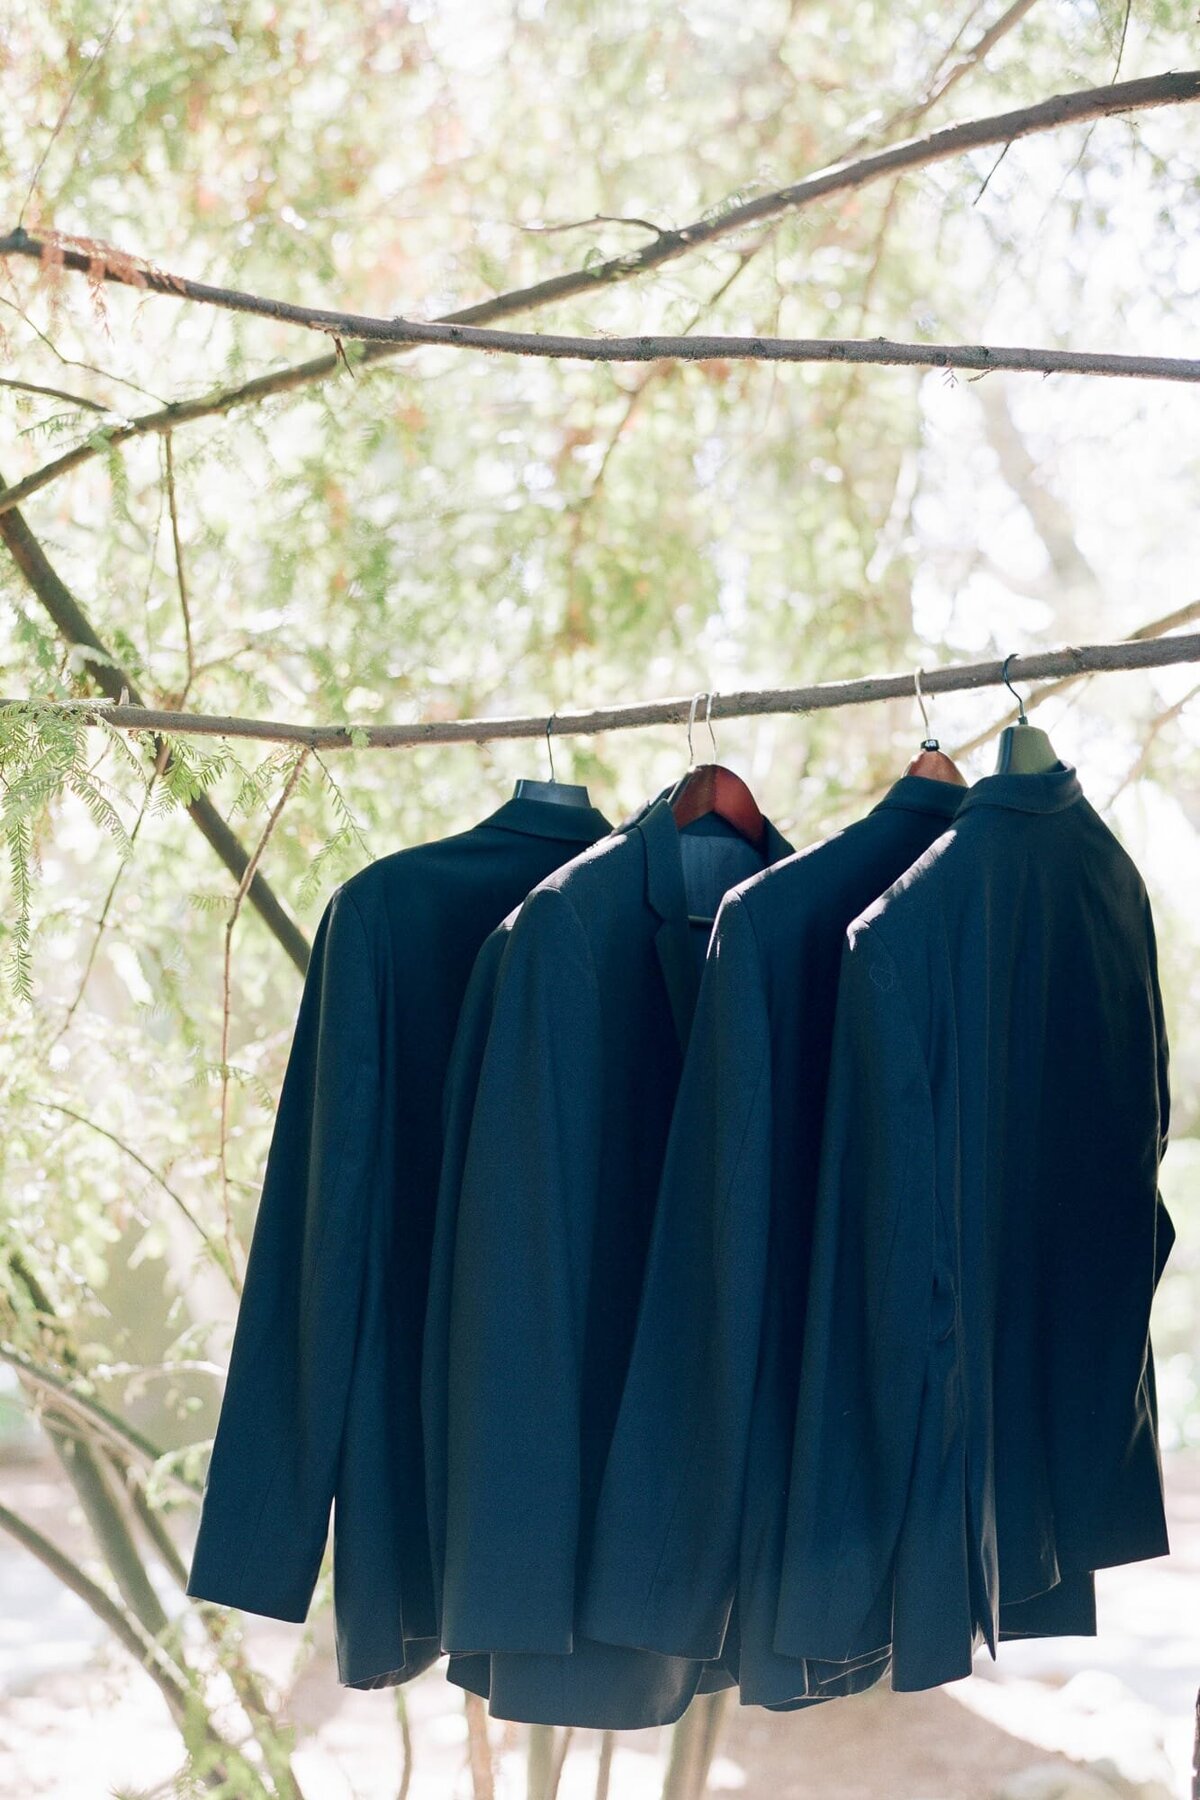 Black suit jackets for groomsmen hanging from a tree branch.